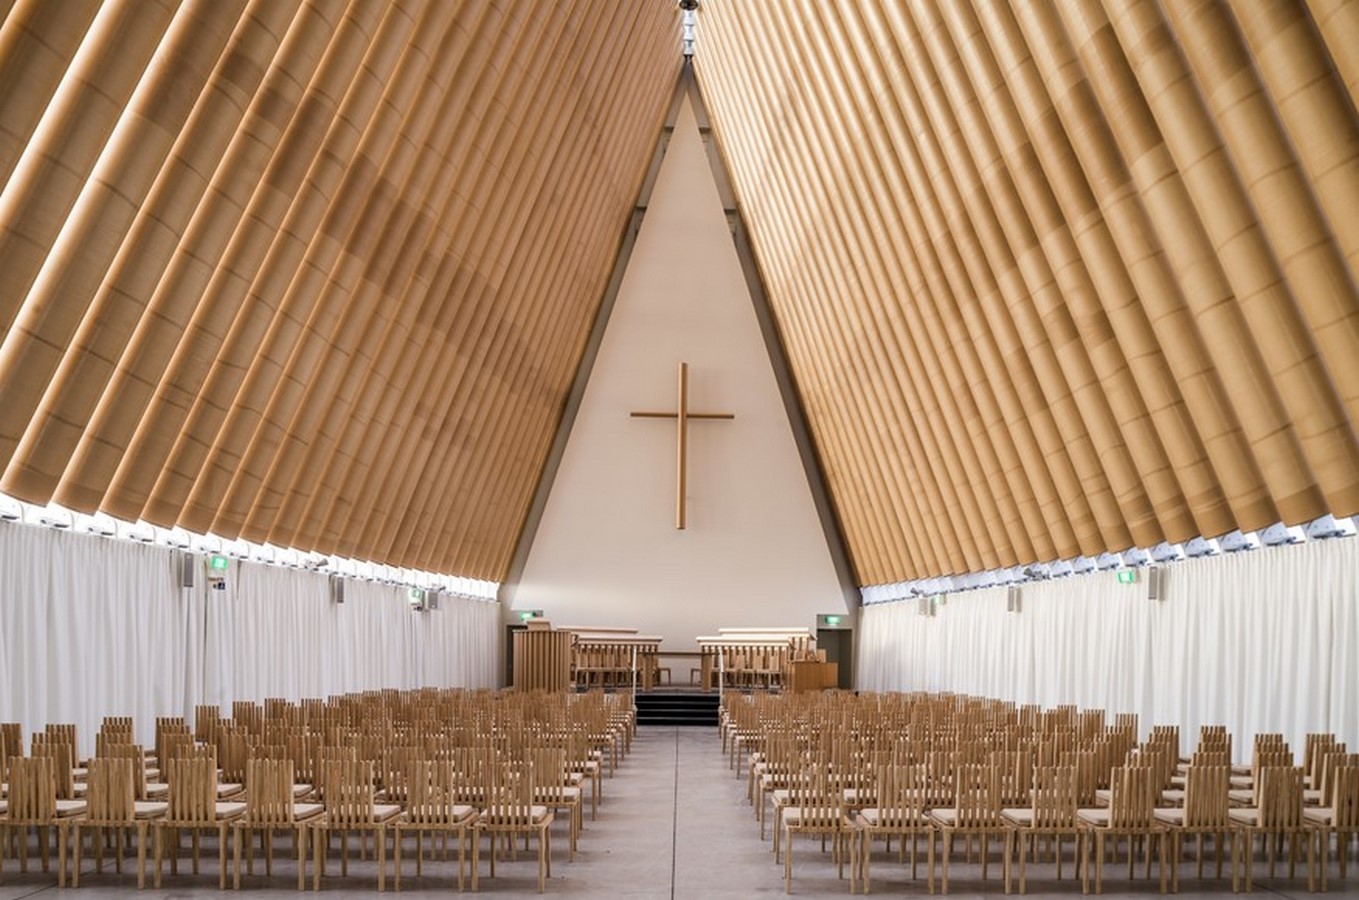 Cardboard Cathedral, New Zealand Sheet3